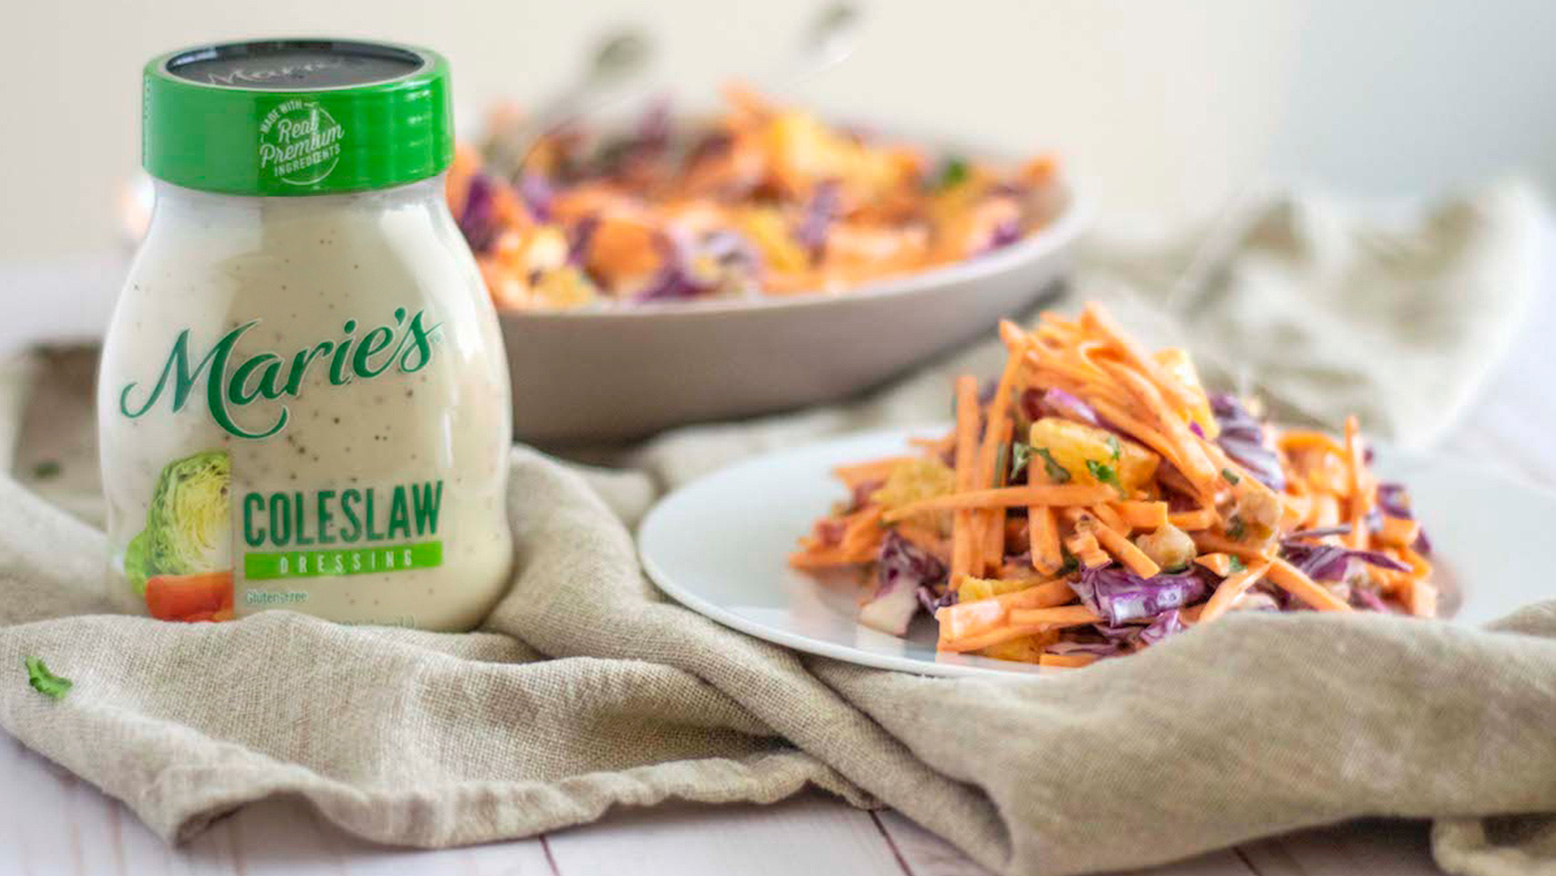 Creamy Sweet Potato Pomegranate Slaw is made with Marie’s Original Coleslaw dressing.